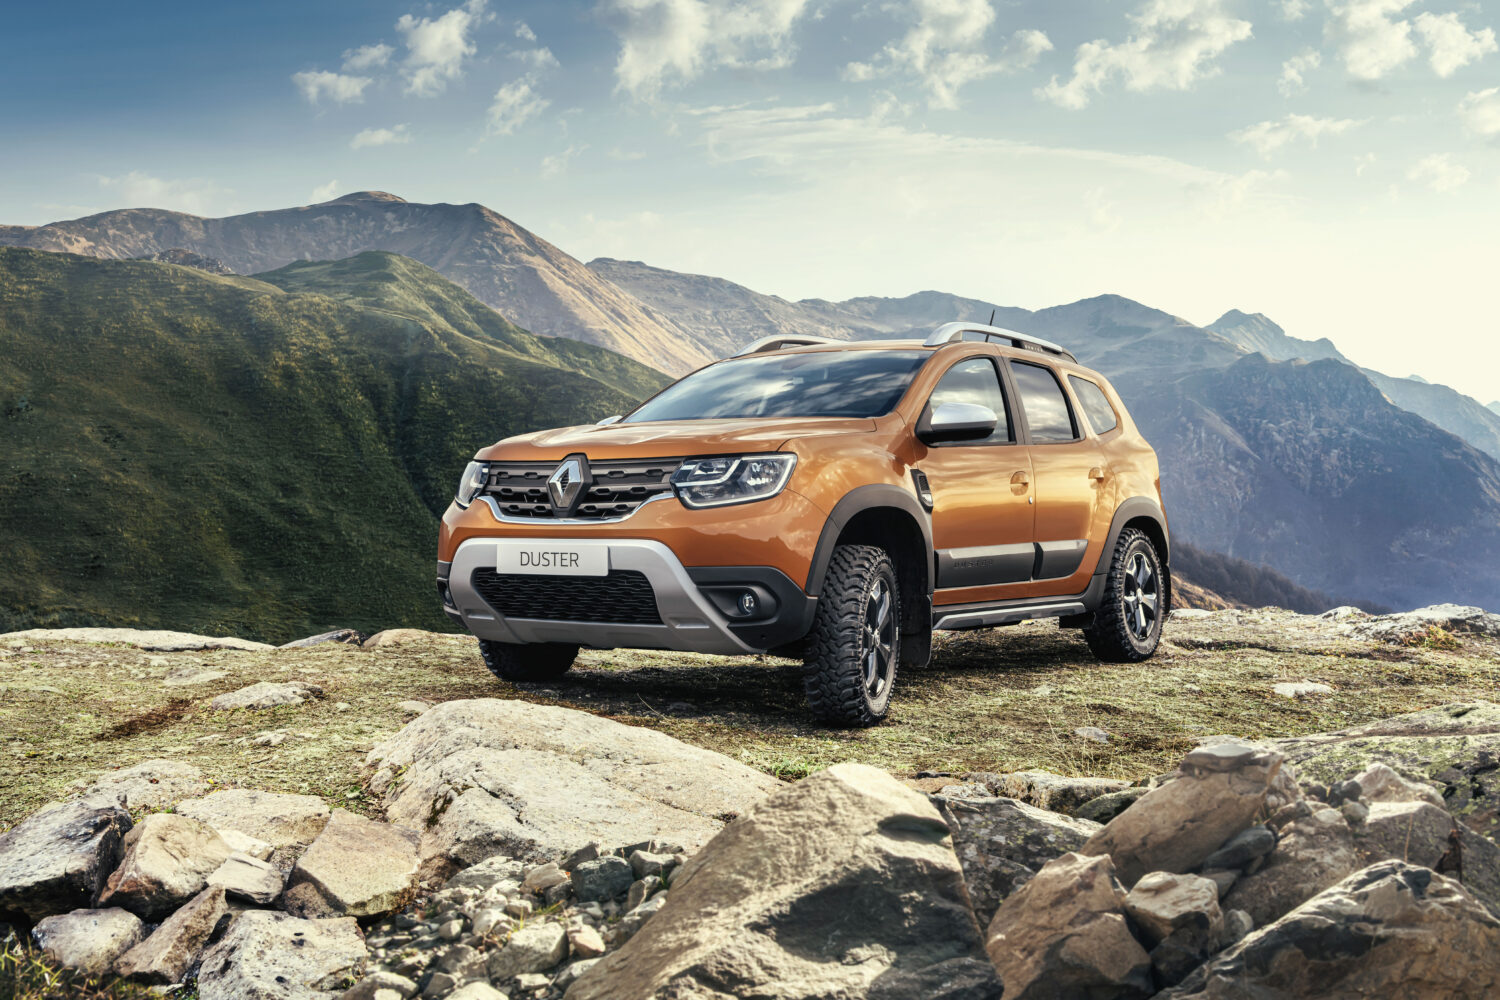 2020 - New Renault Duster